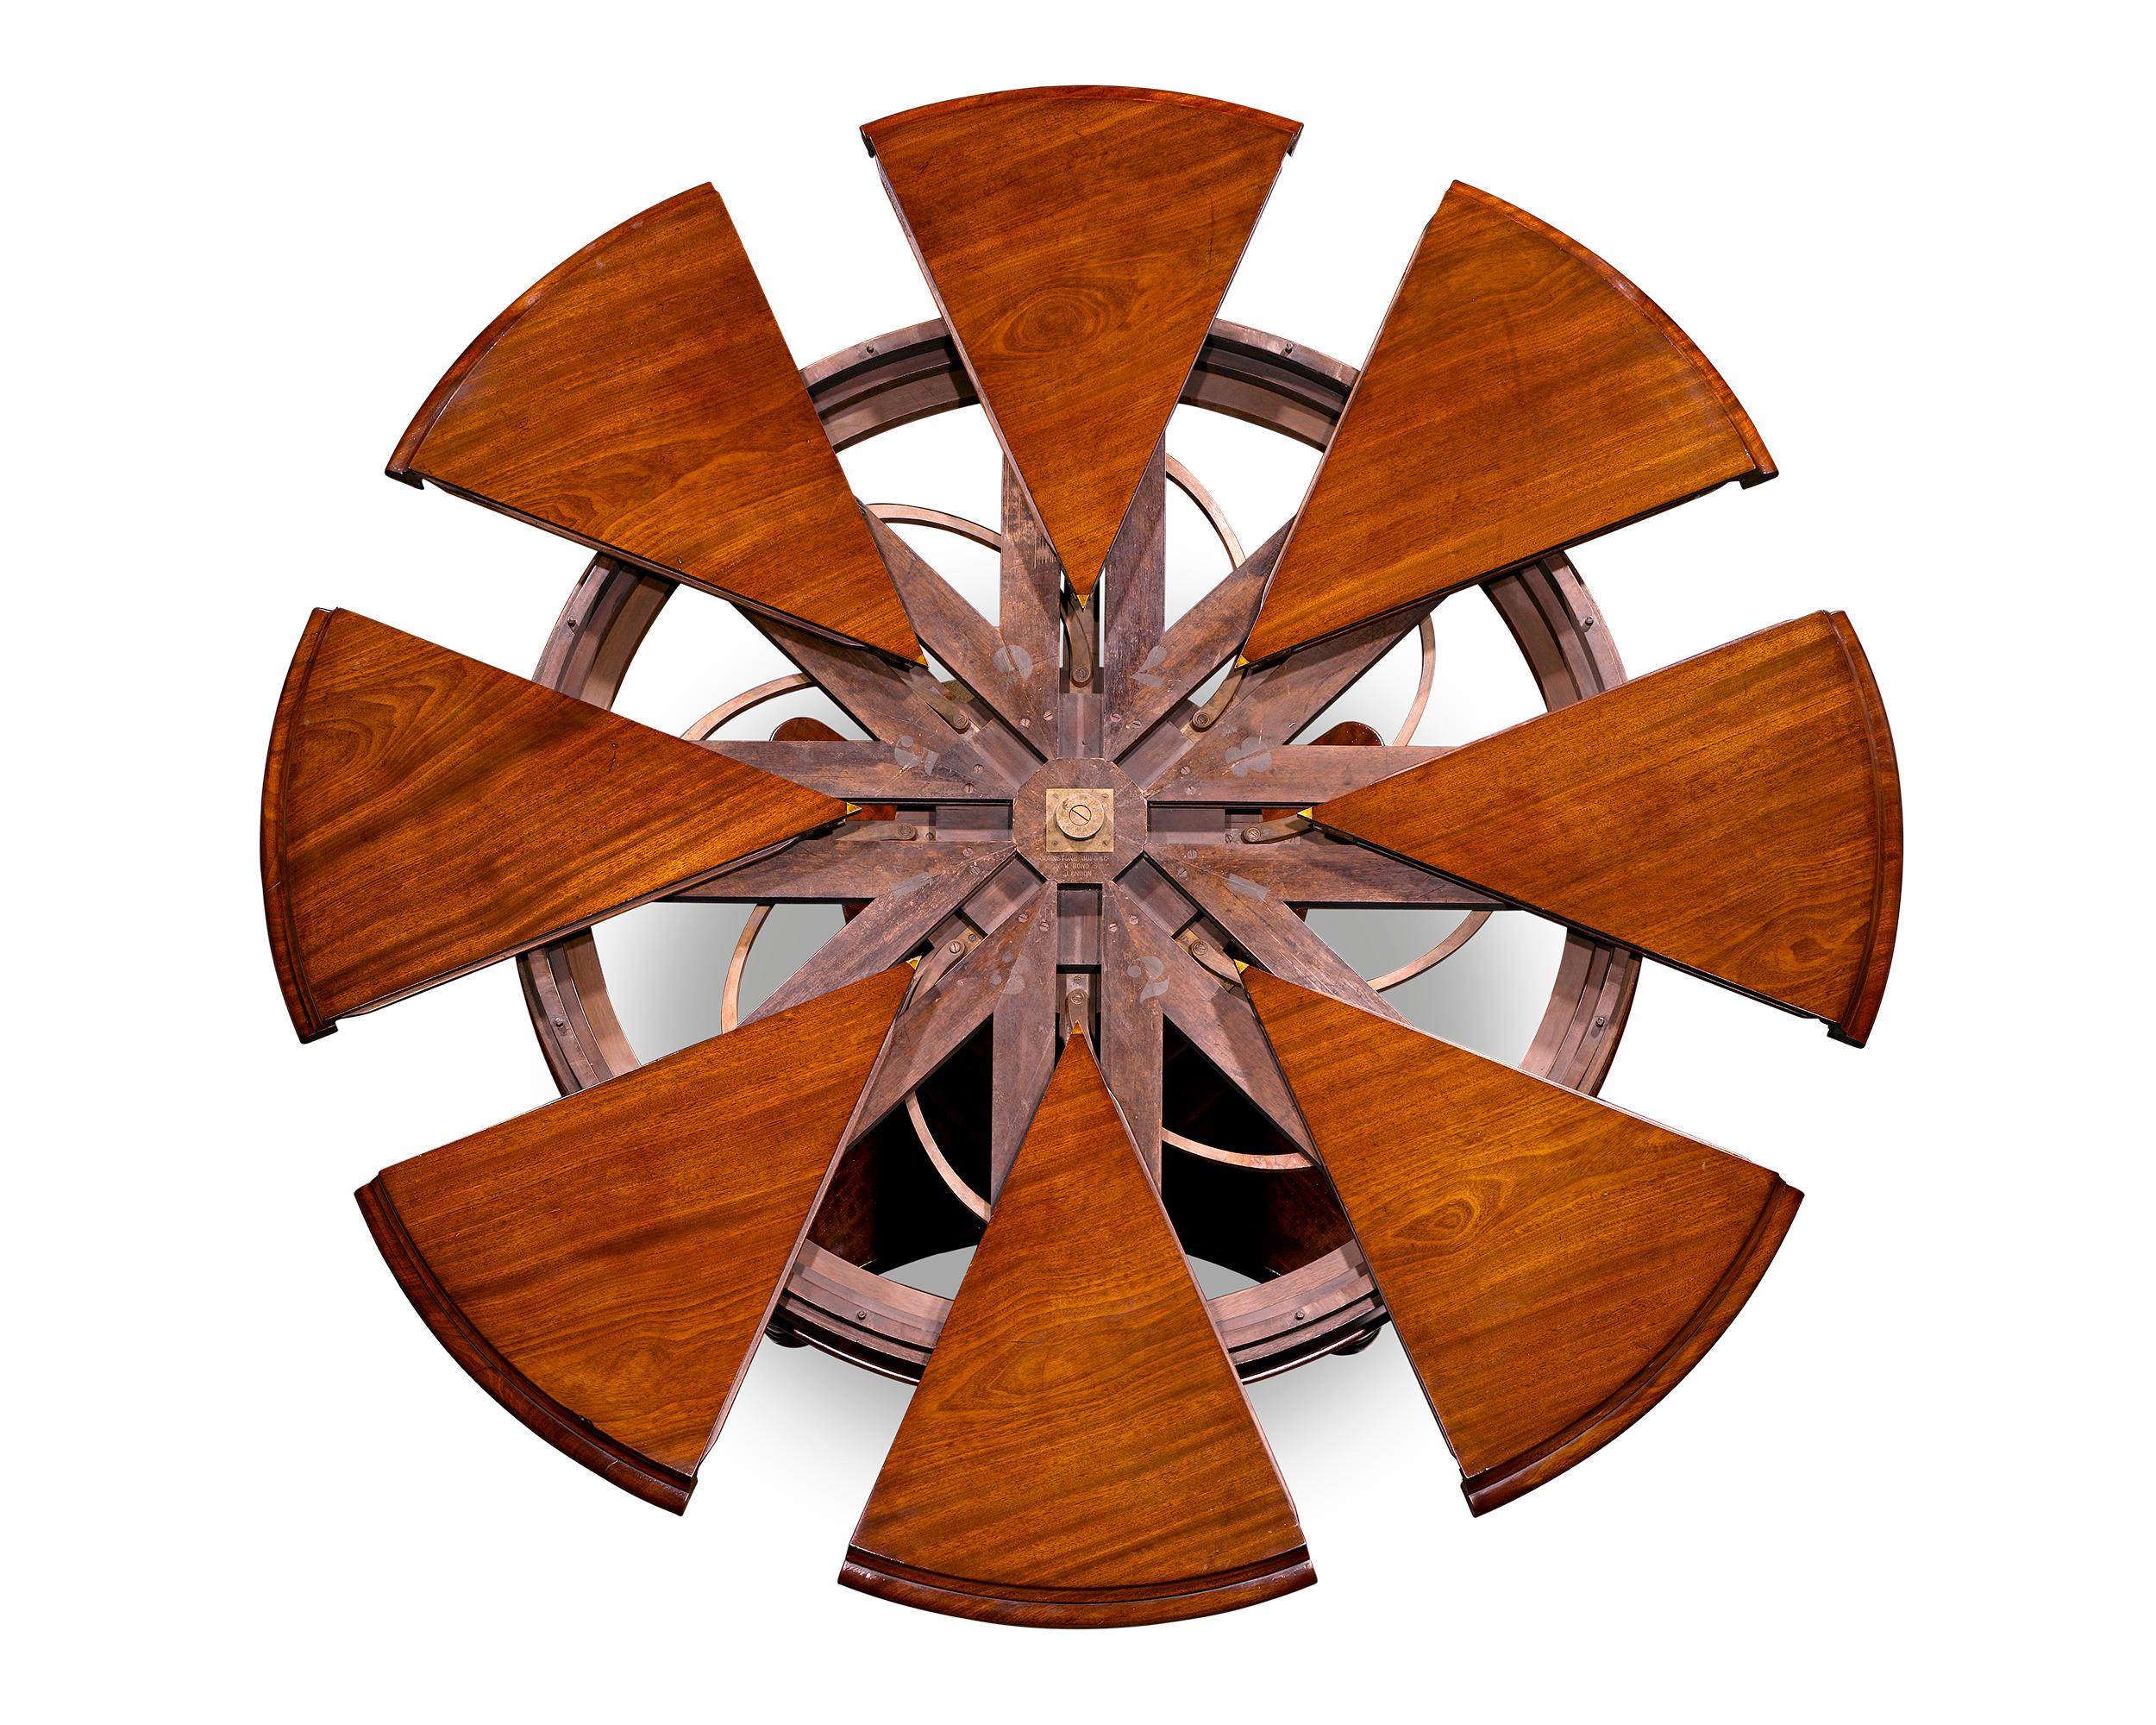 Extremely rare and important, this English mahogany circular extension dining table was designed and patented by Robert Jupe and retailed by the company he co-founded, Johnstone, Jupe & Co. One of only a handful known, this table illustrates